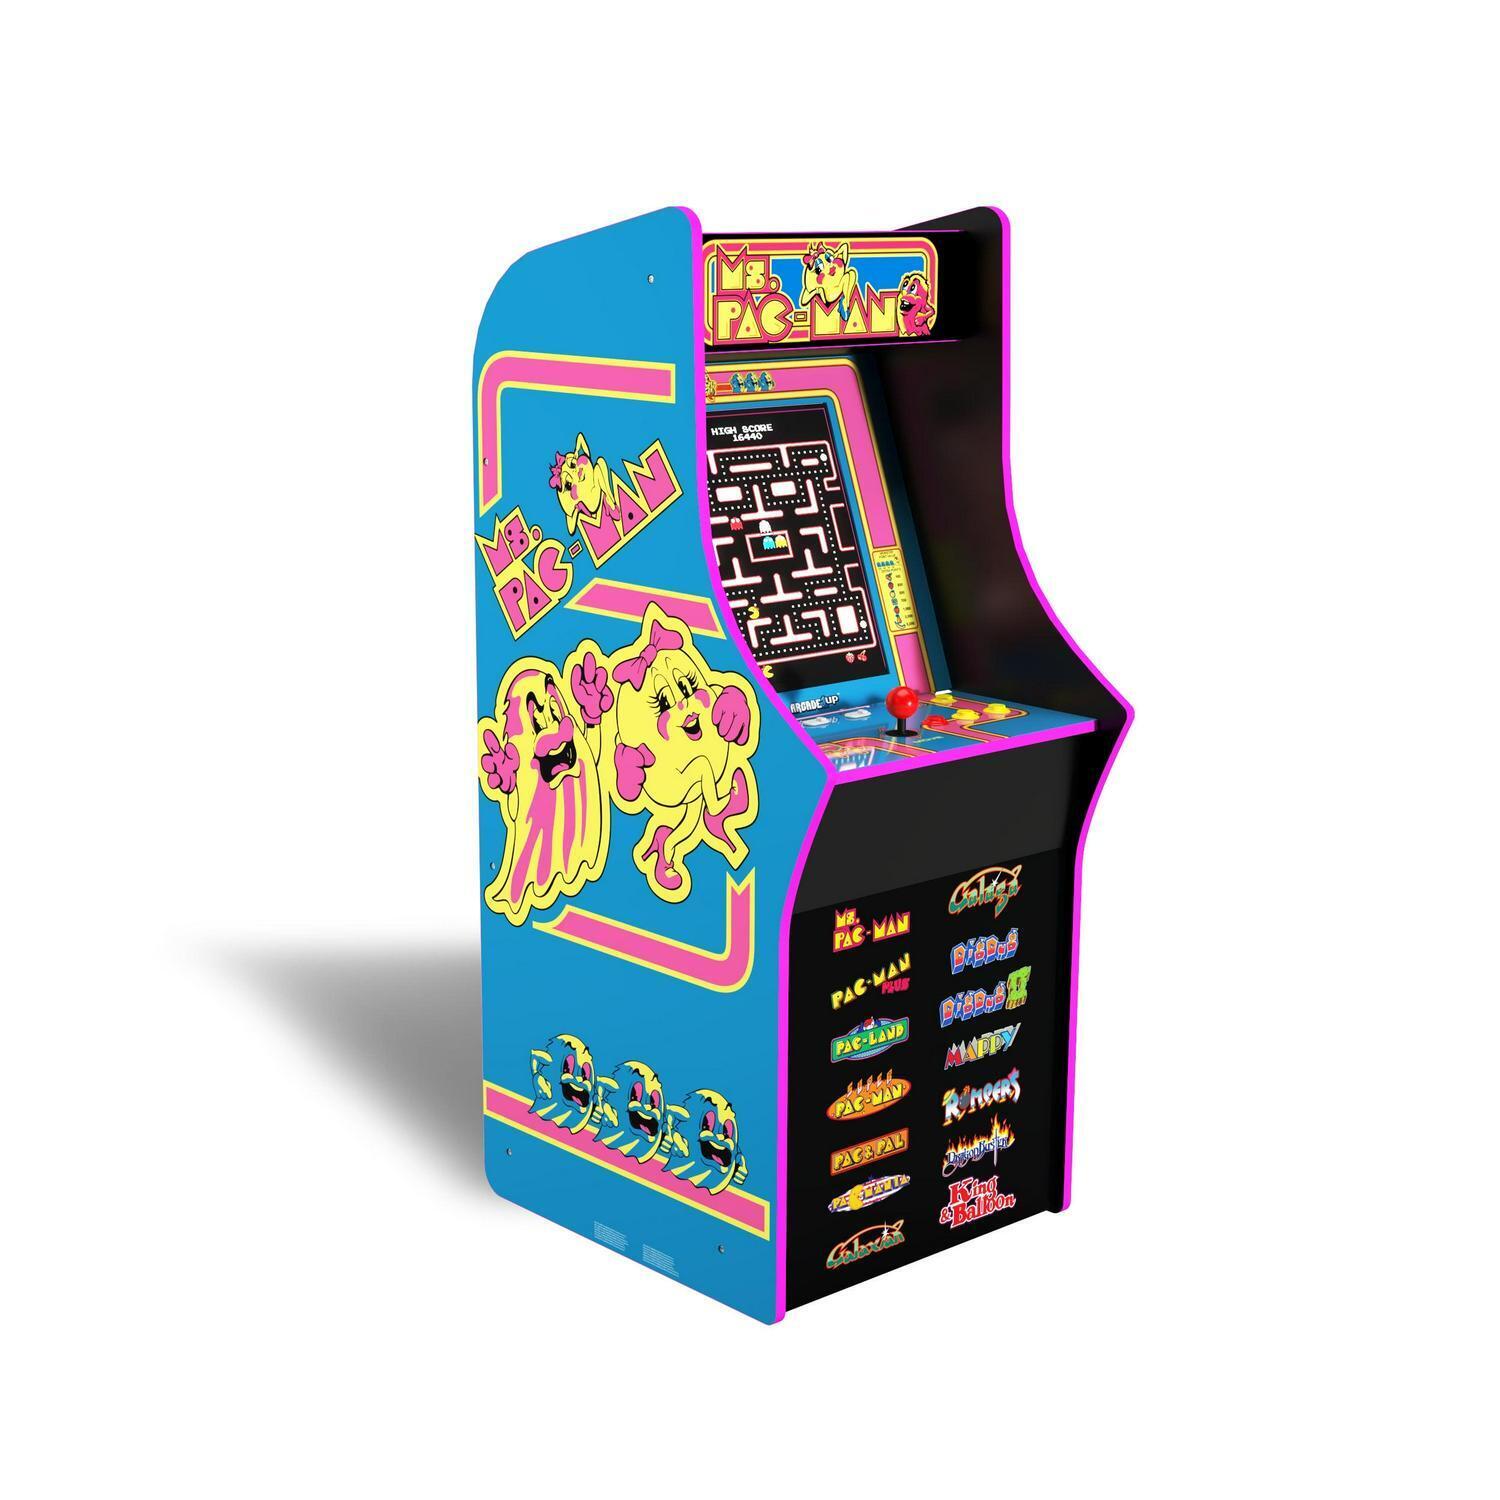 Arcade1Up Ms. PAC-MAN Classic Arcade Game, built for your home, 4-foot-tall 14